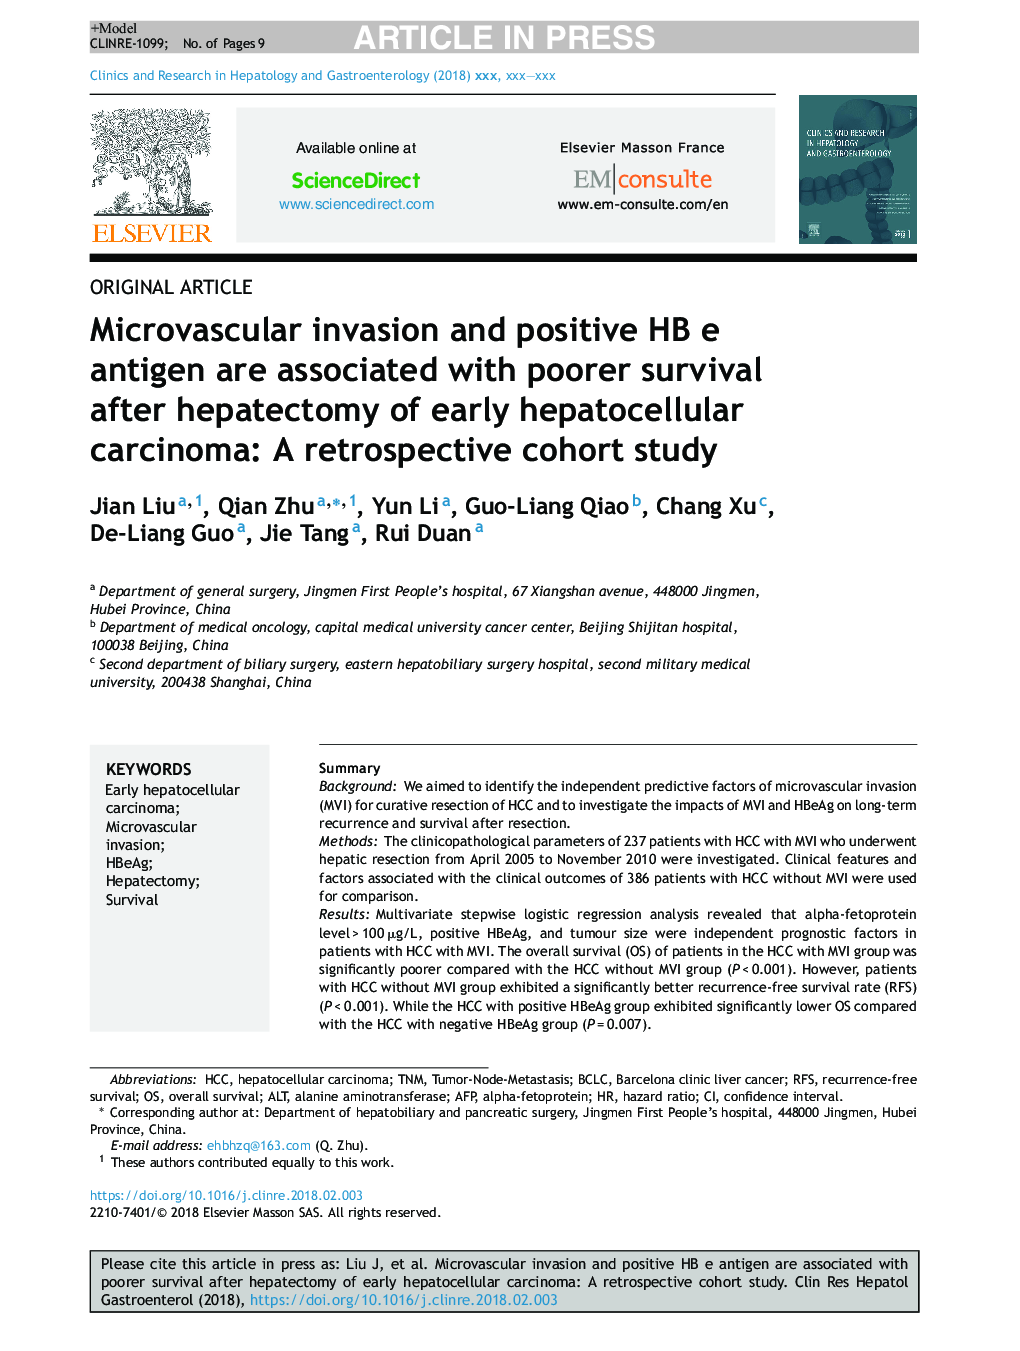 Microvascular invasion and positive HB e antigen are associated with poorer survival after hepatectomy of early hepatocellular carcinoma: A retrospective cohort study